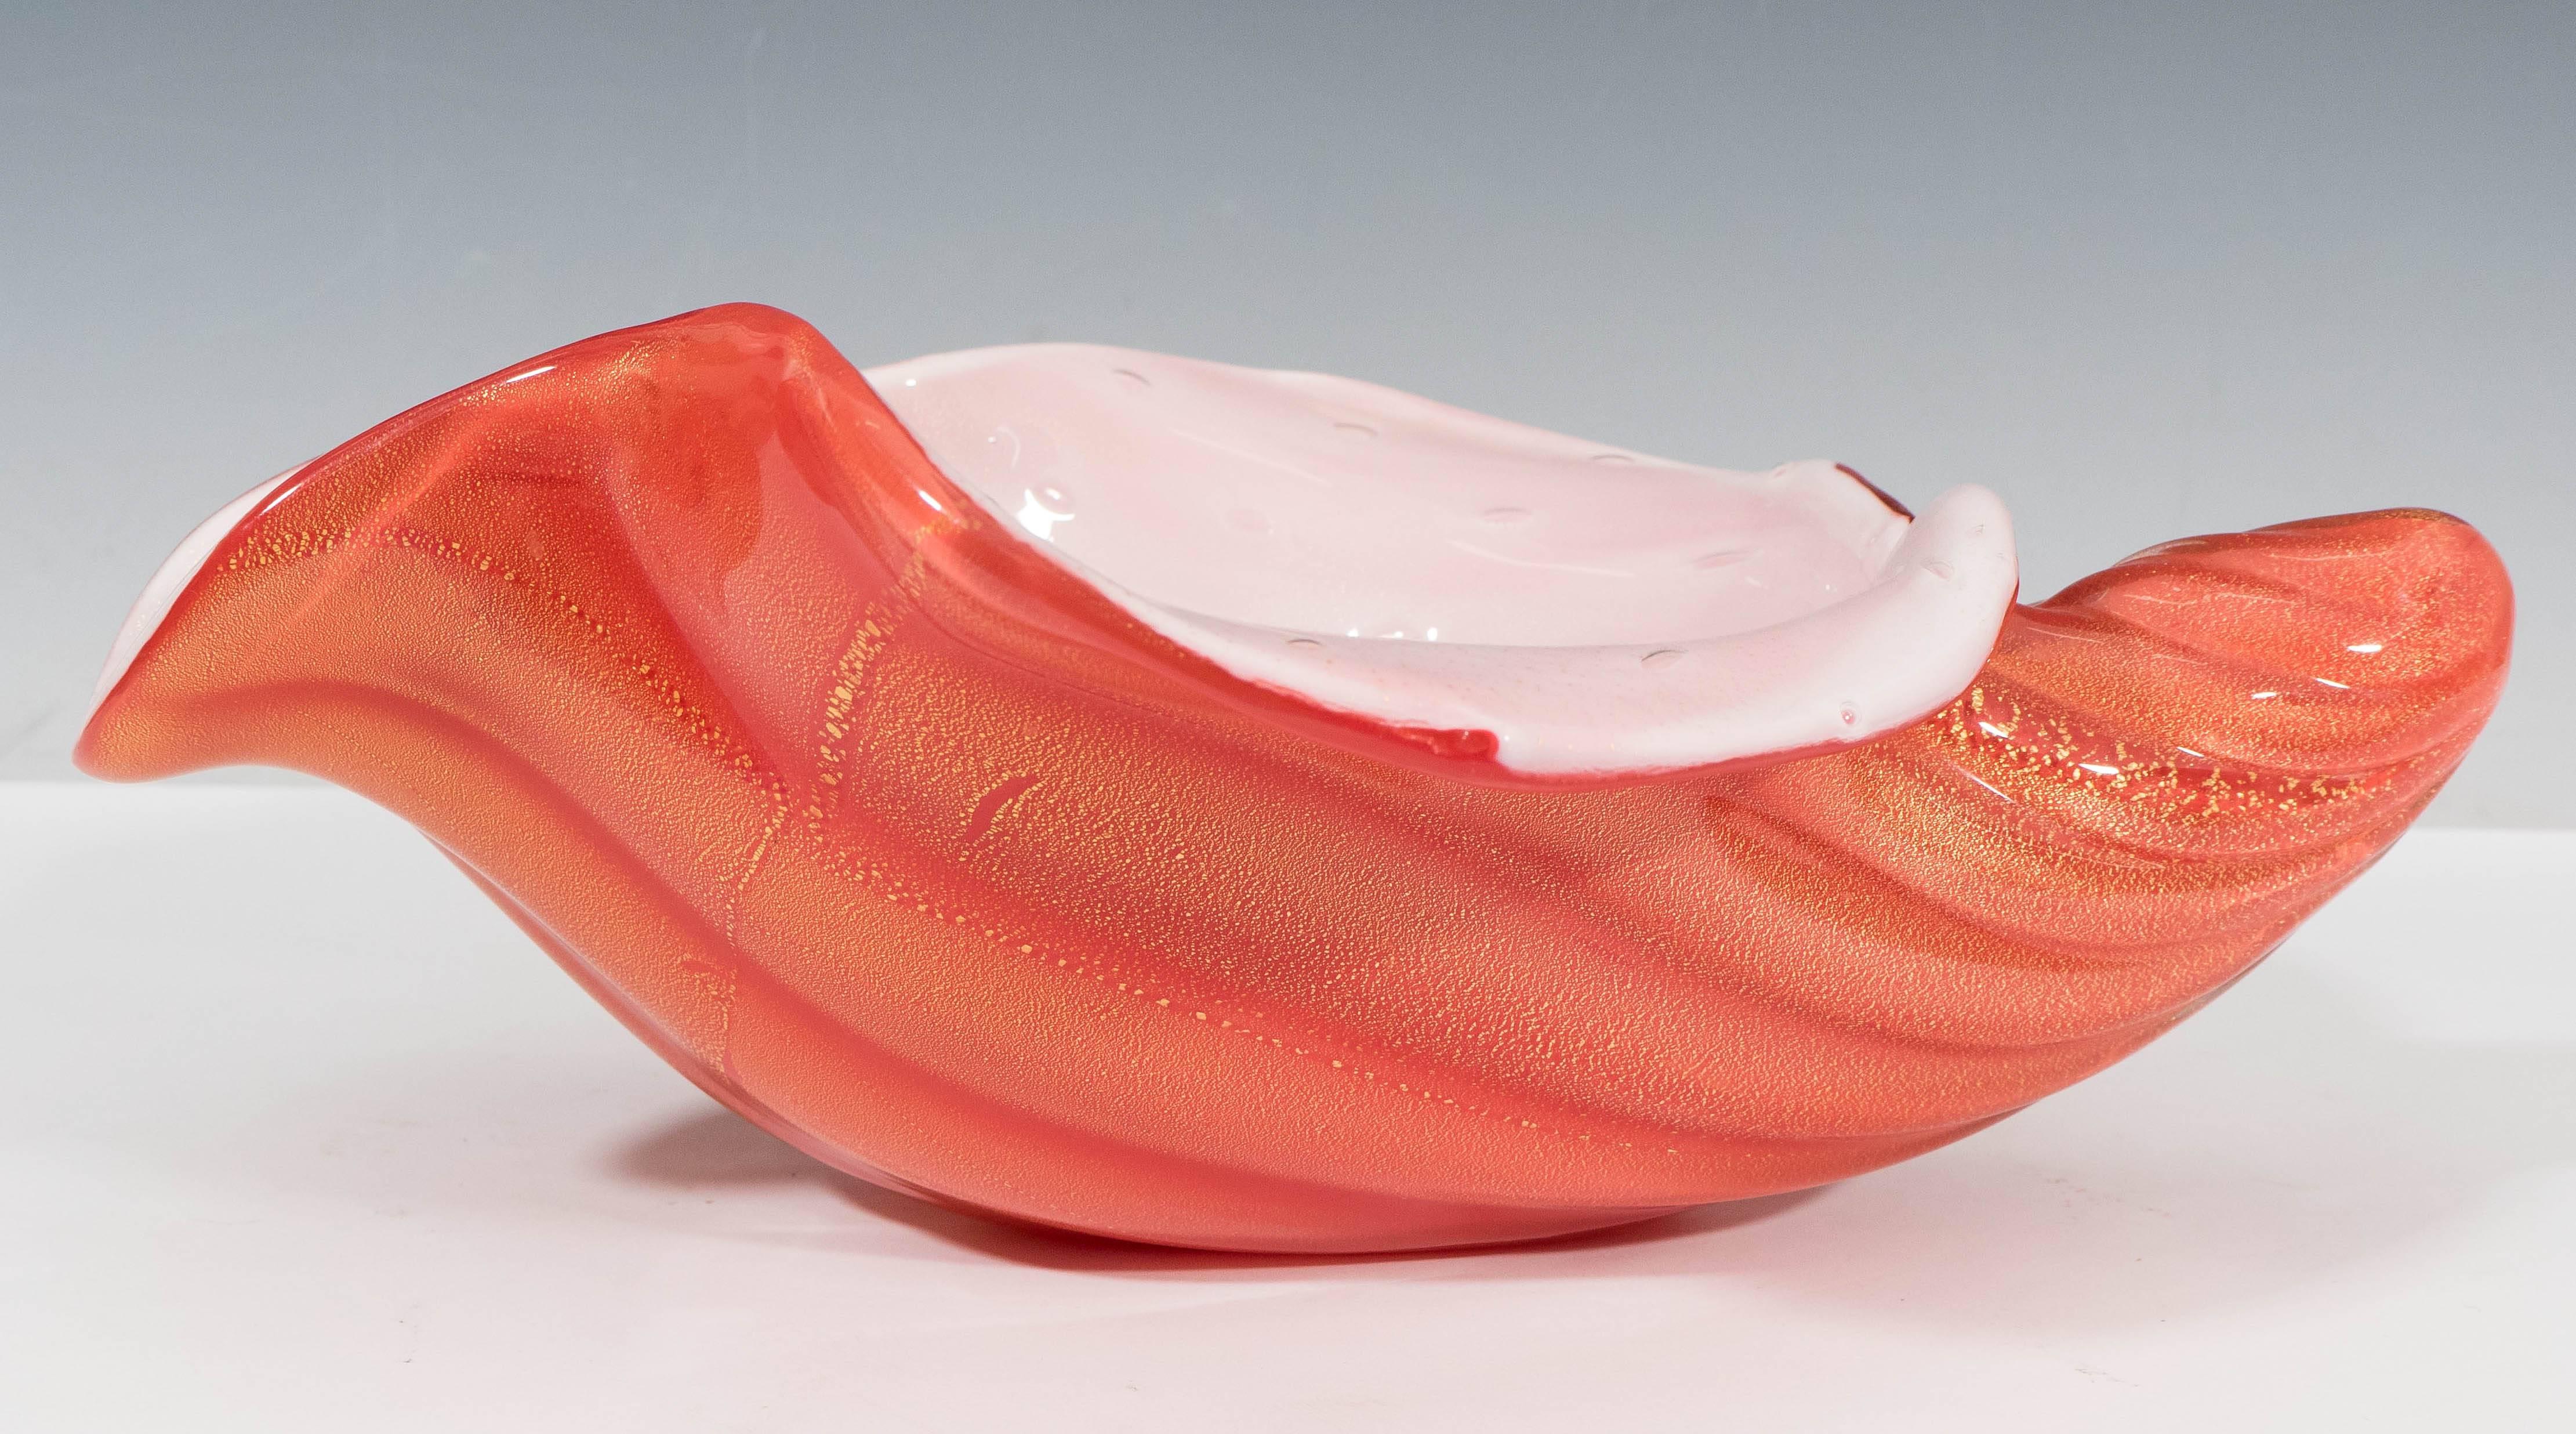 An impressive Murano, handblown glass bowl, produced in Italy, circa 1950s-1960s, by Alfredo Barbini. The intricate technique is called 'incamiciato,' where two layers of glass are combined: The inner layer is opaque white with controlled bubbles,